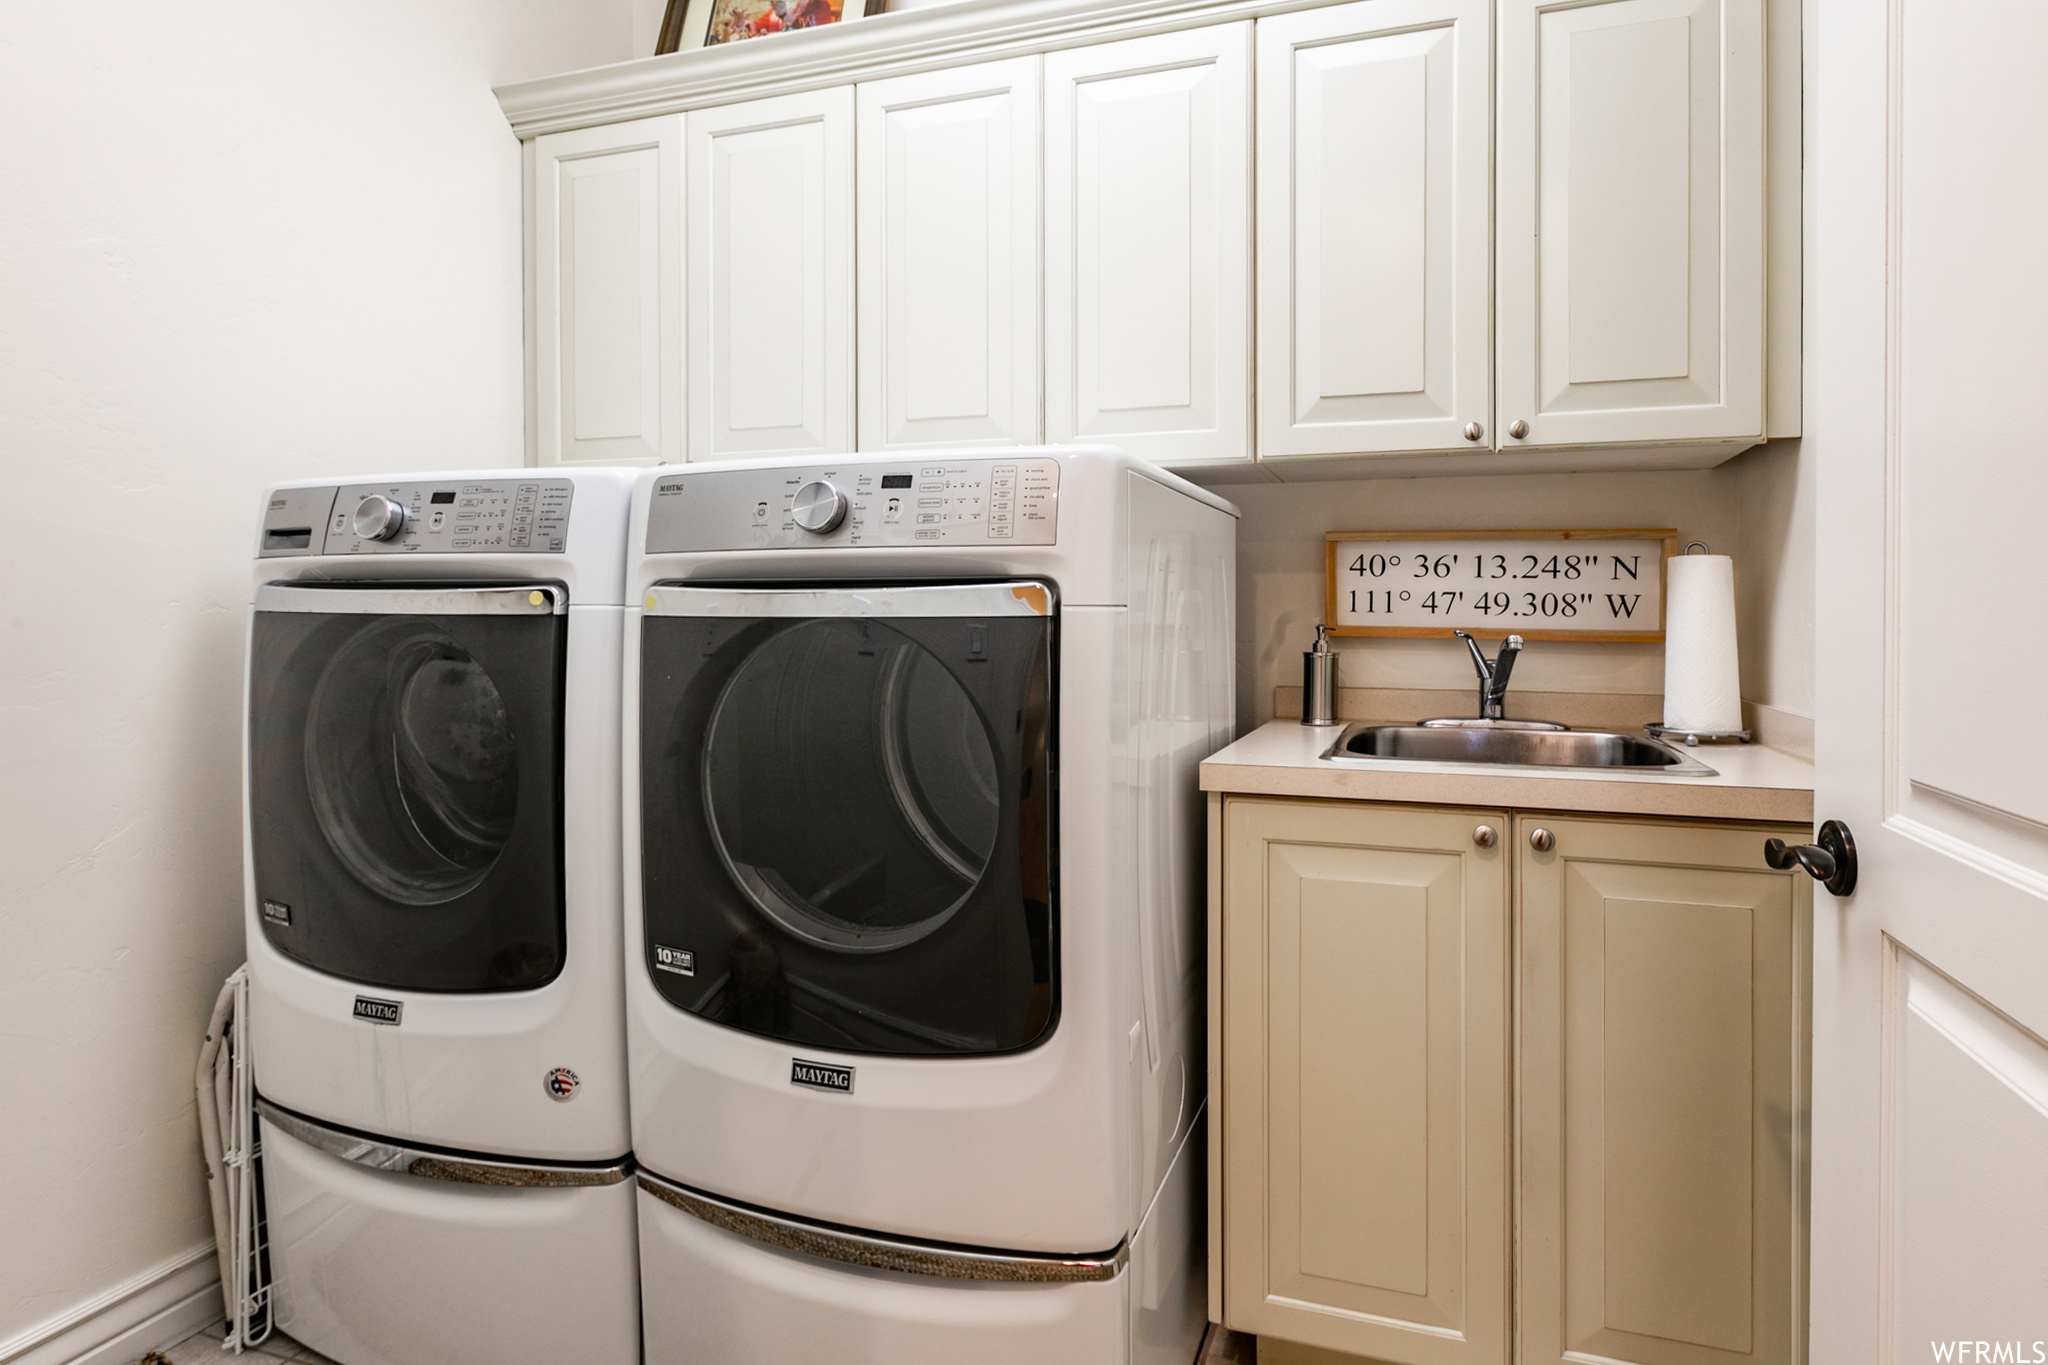 The laundry includes a sink, lots of storage and tile flooring.